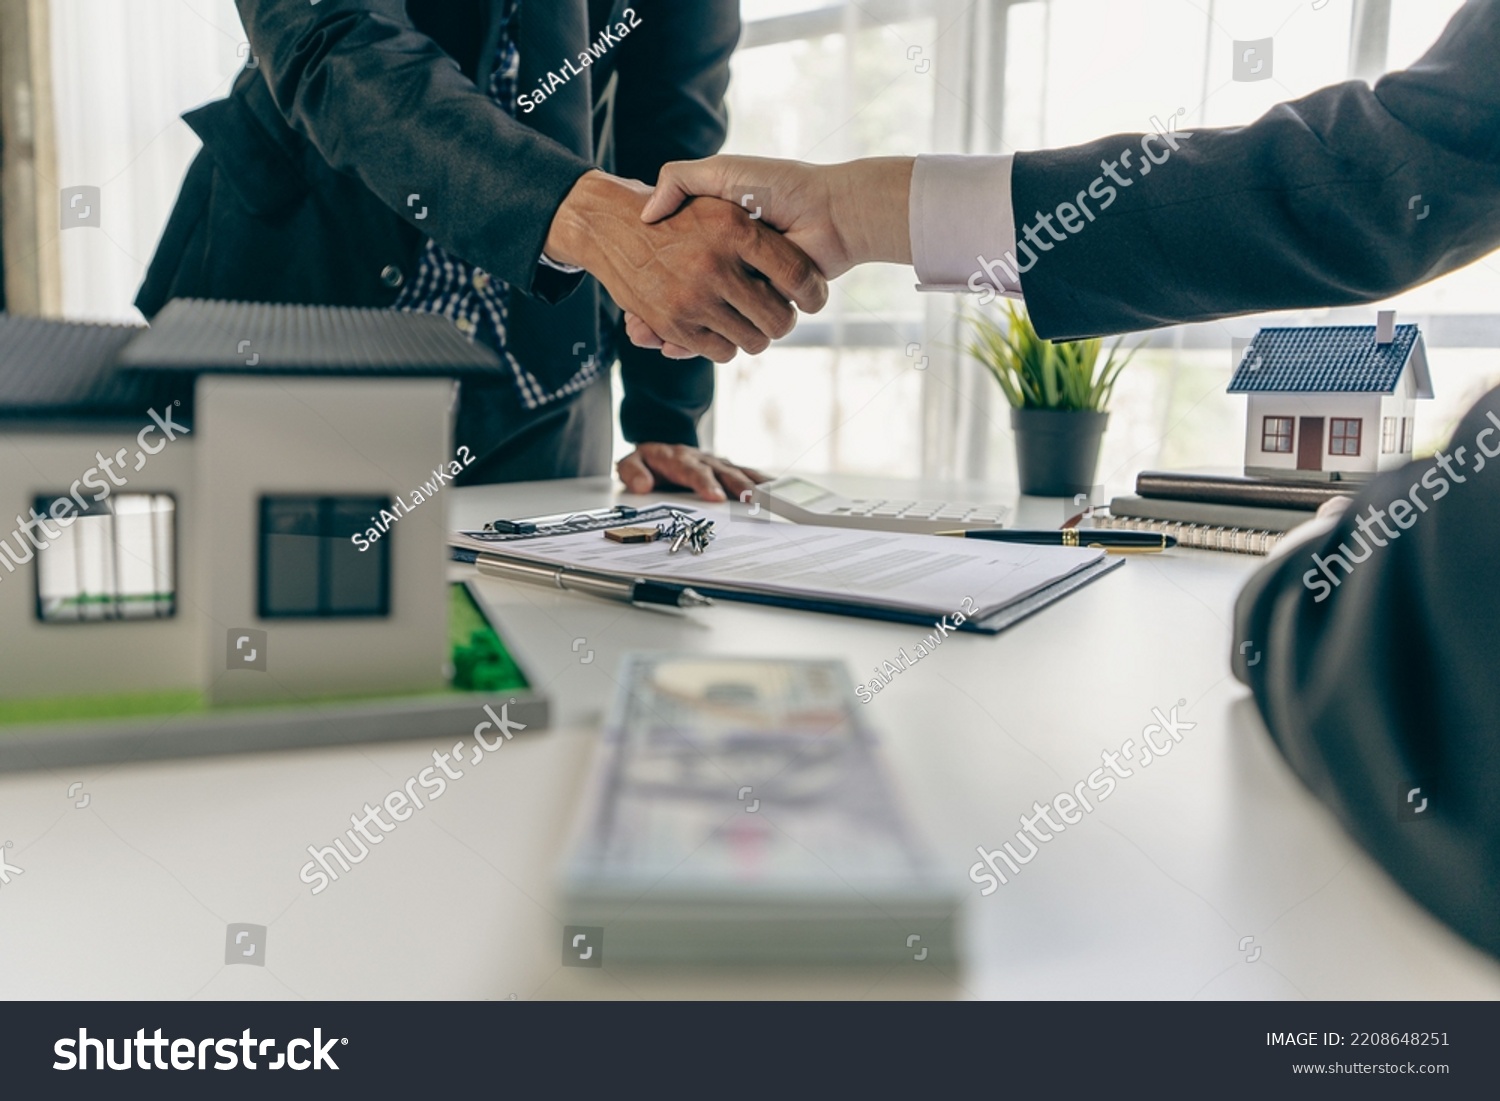 A real estate agent shakes hands with a client after completing a transaction regarding a house contract agreement. Contract documents and a house model on a wooden table. #2208648251